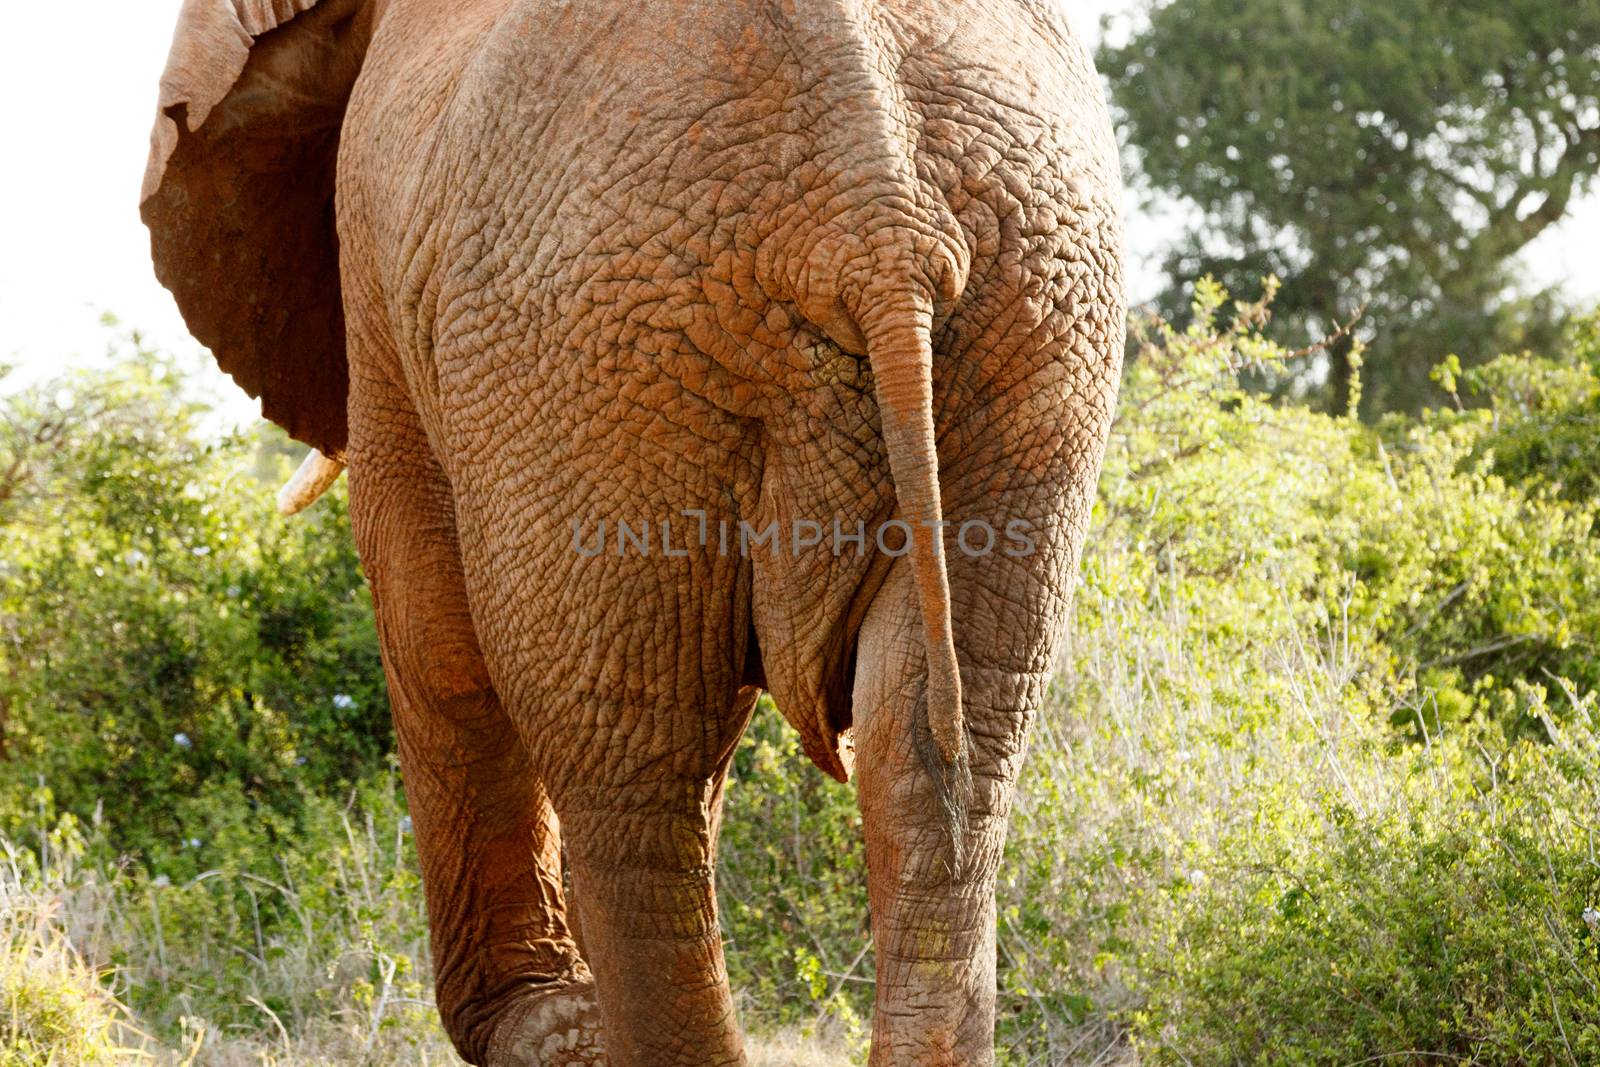 Close up of the backside of The African bush elephant